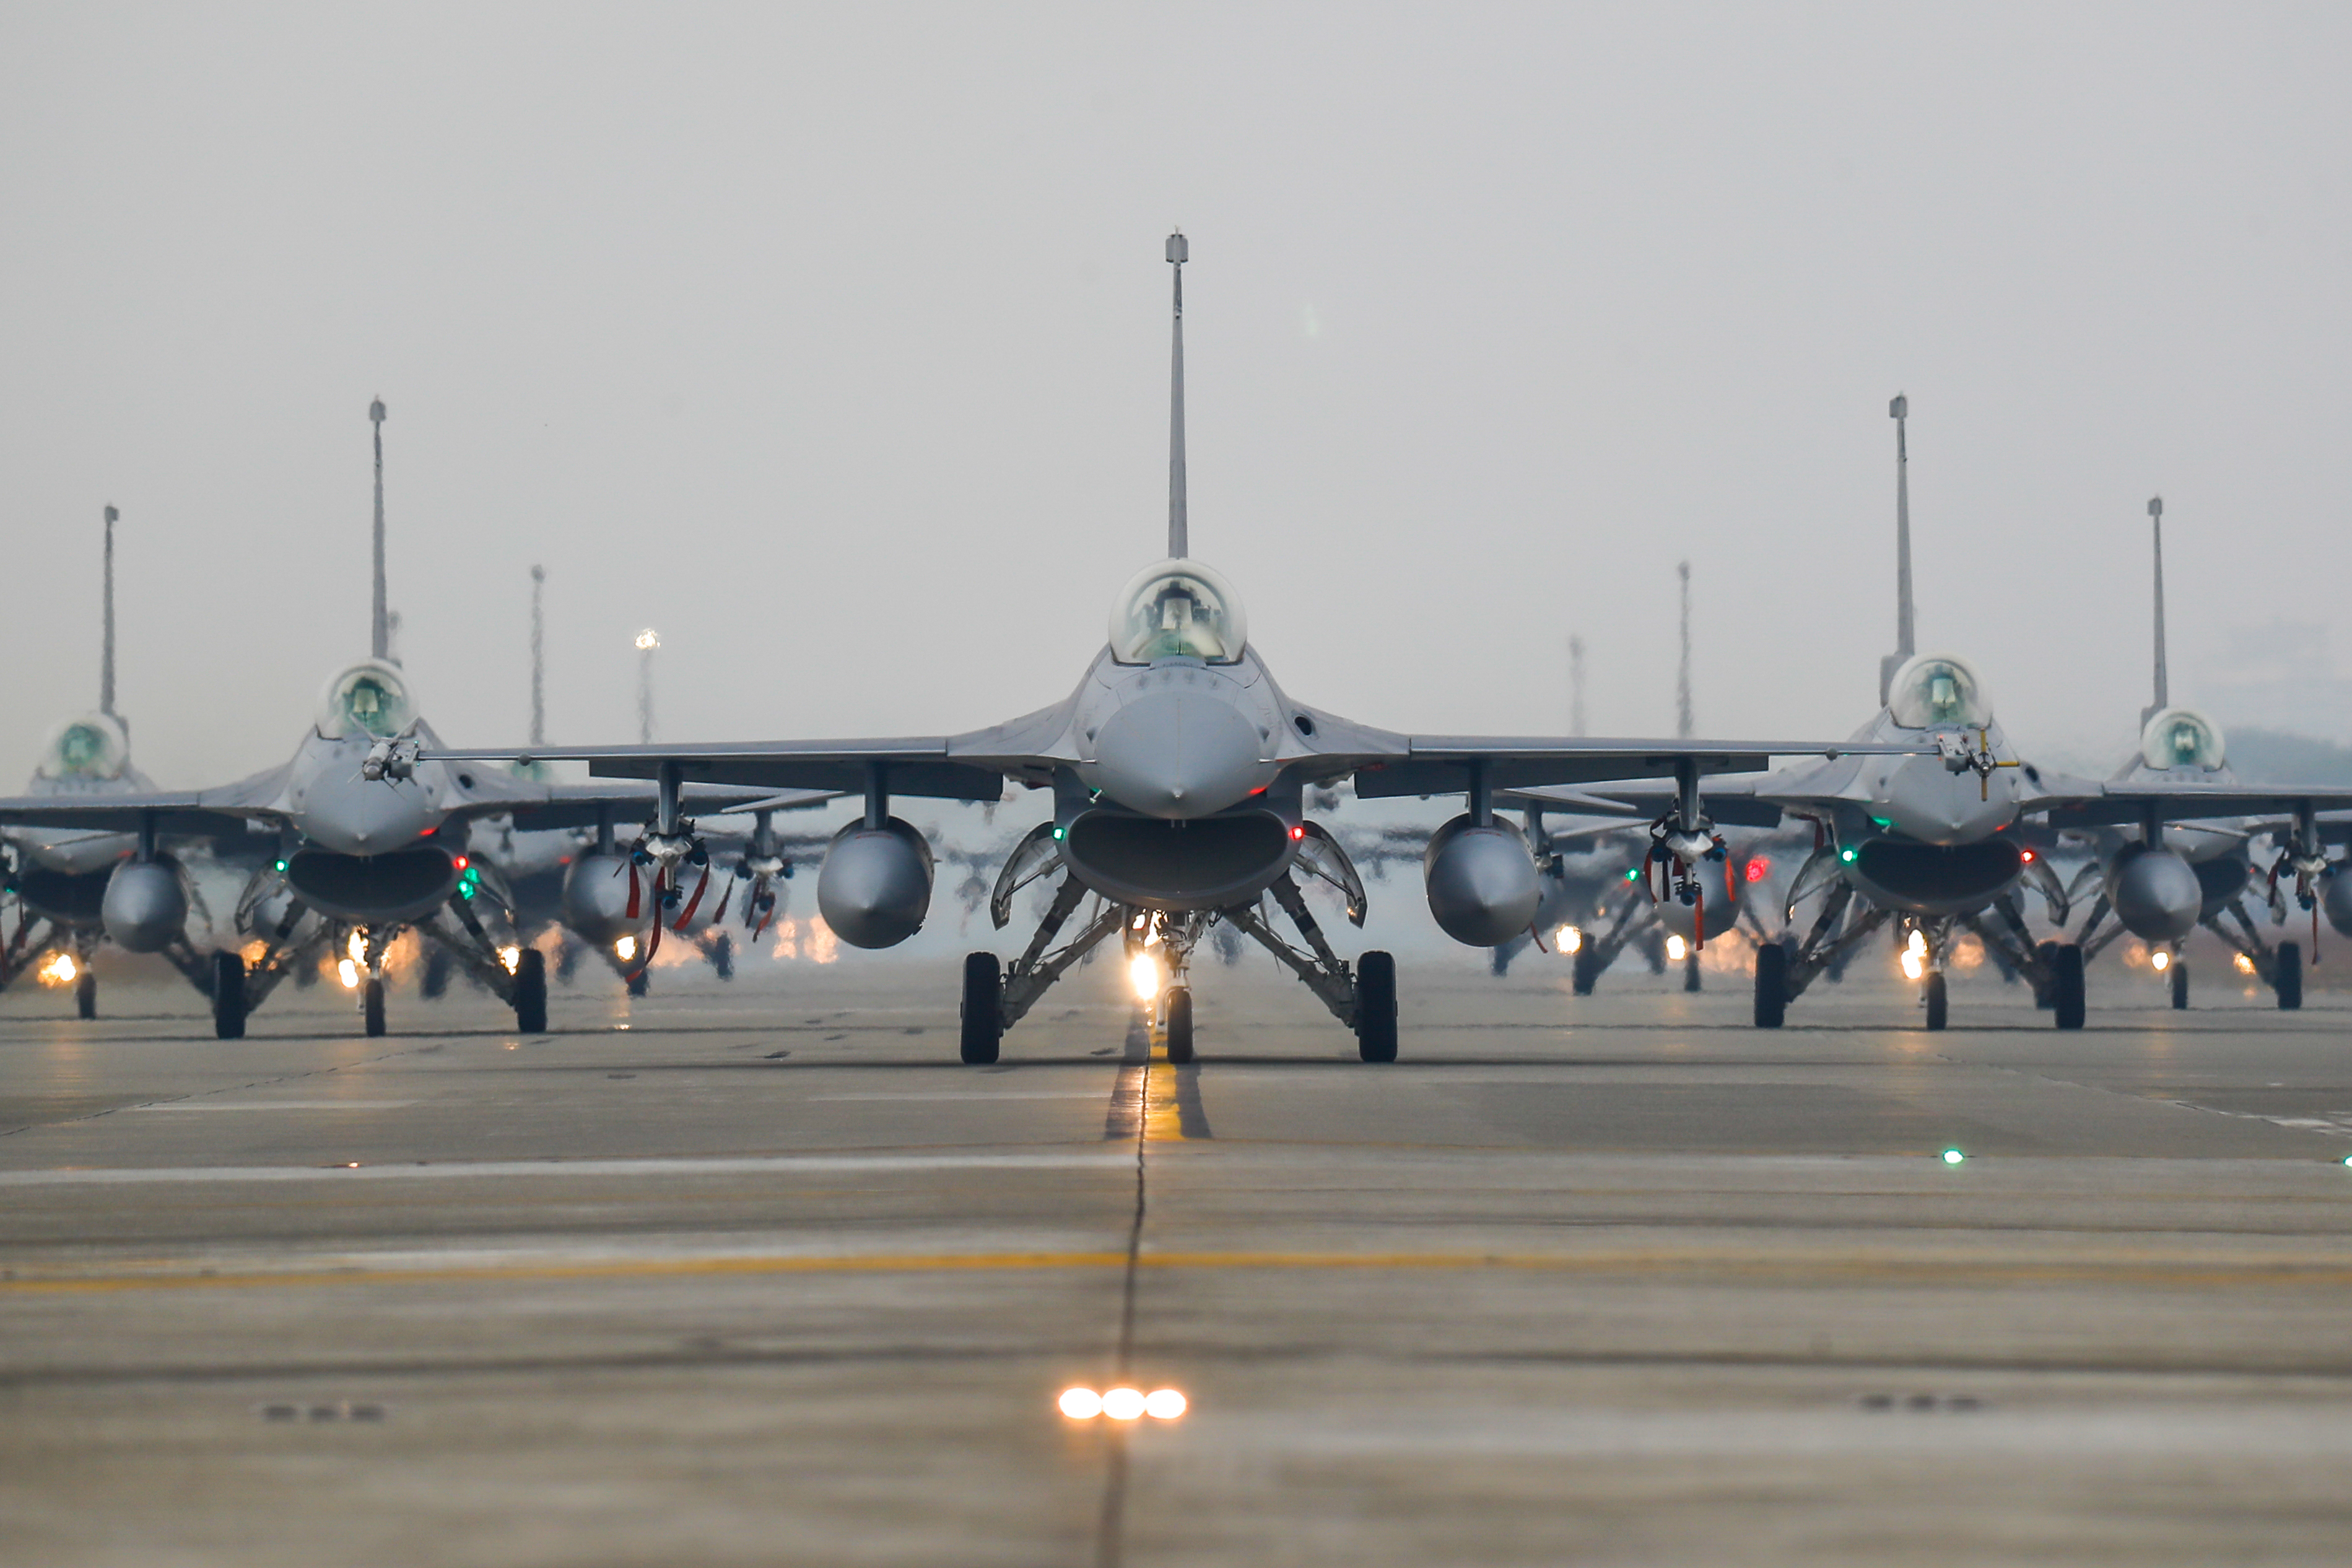 F-16V jet fighters taxi on the runway at the Air Force base, as the Taiwanese military holds a drill for preparedness enhancement in Chiayi, Taiwan. © Ceng Shou Yi / NurPhoto via Reuters Connect